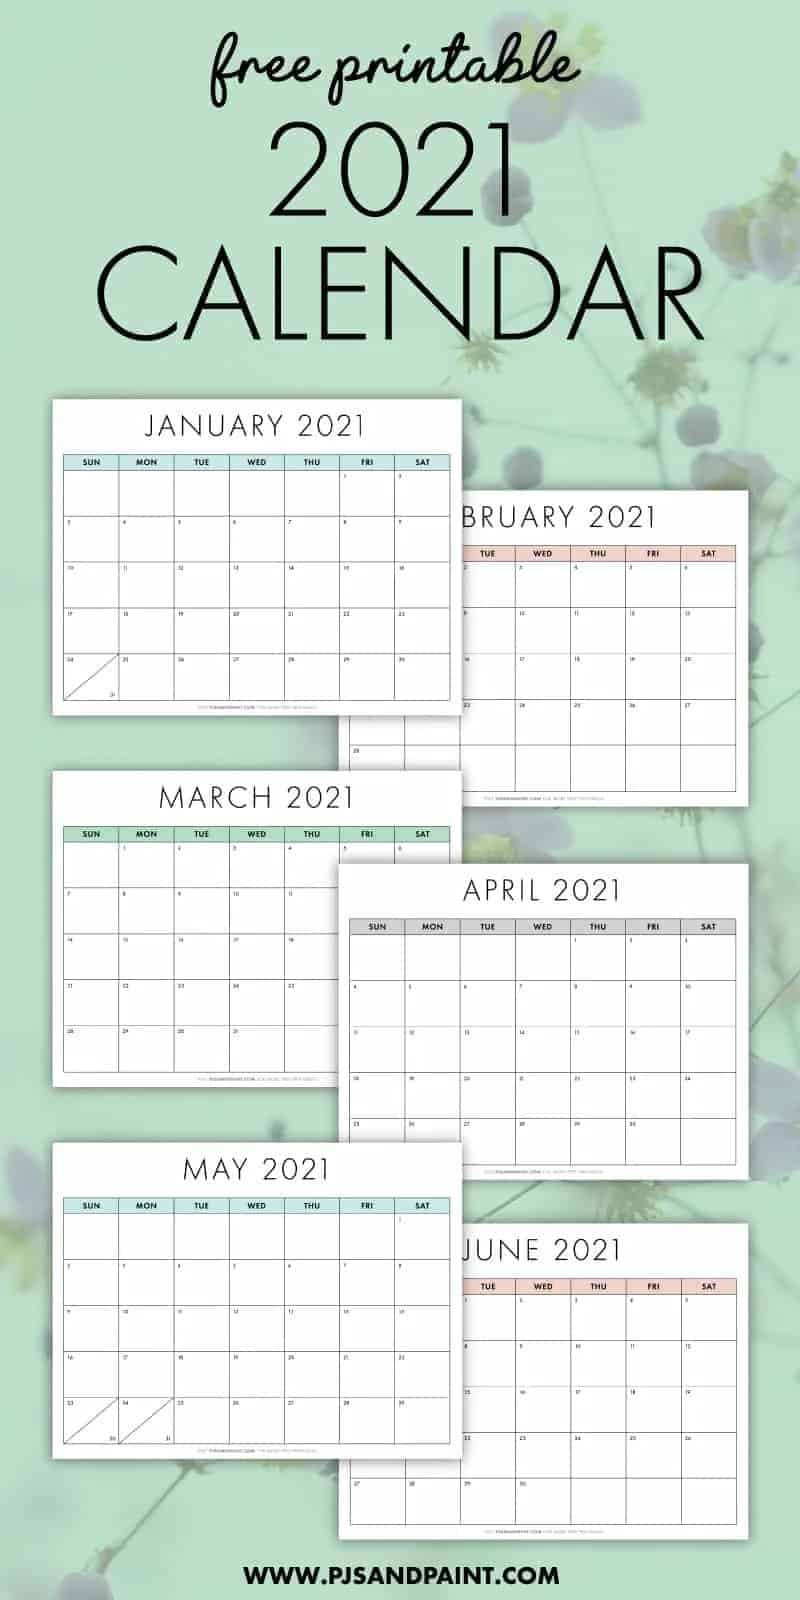 13 Cute Free Printable Calendars For 2021 You&#039;Ll Love-2 Page 2021 Monthly Calendar Printable Free